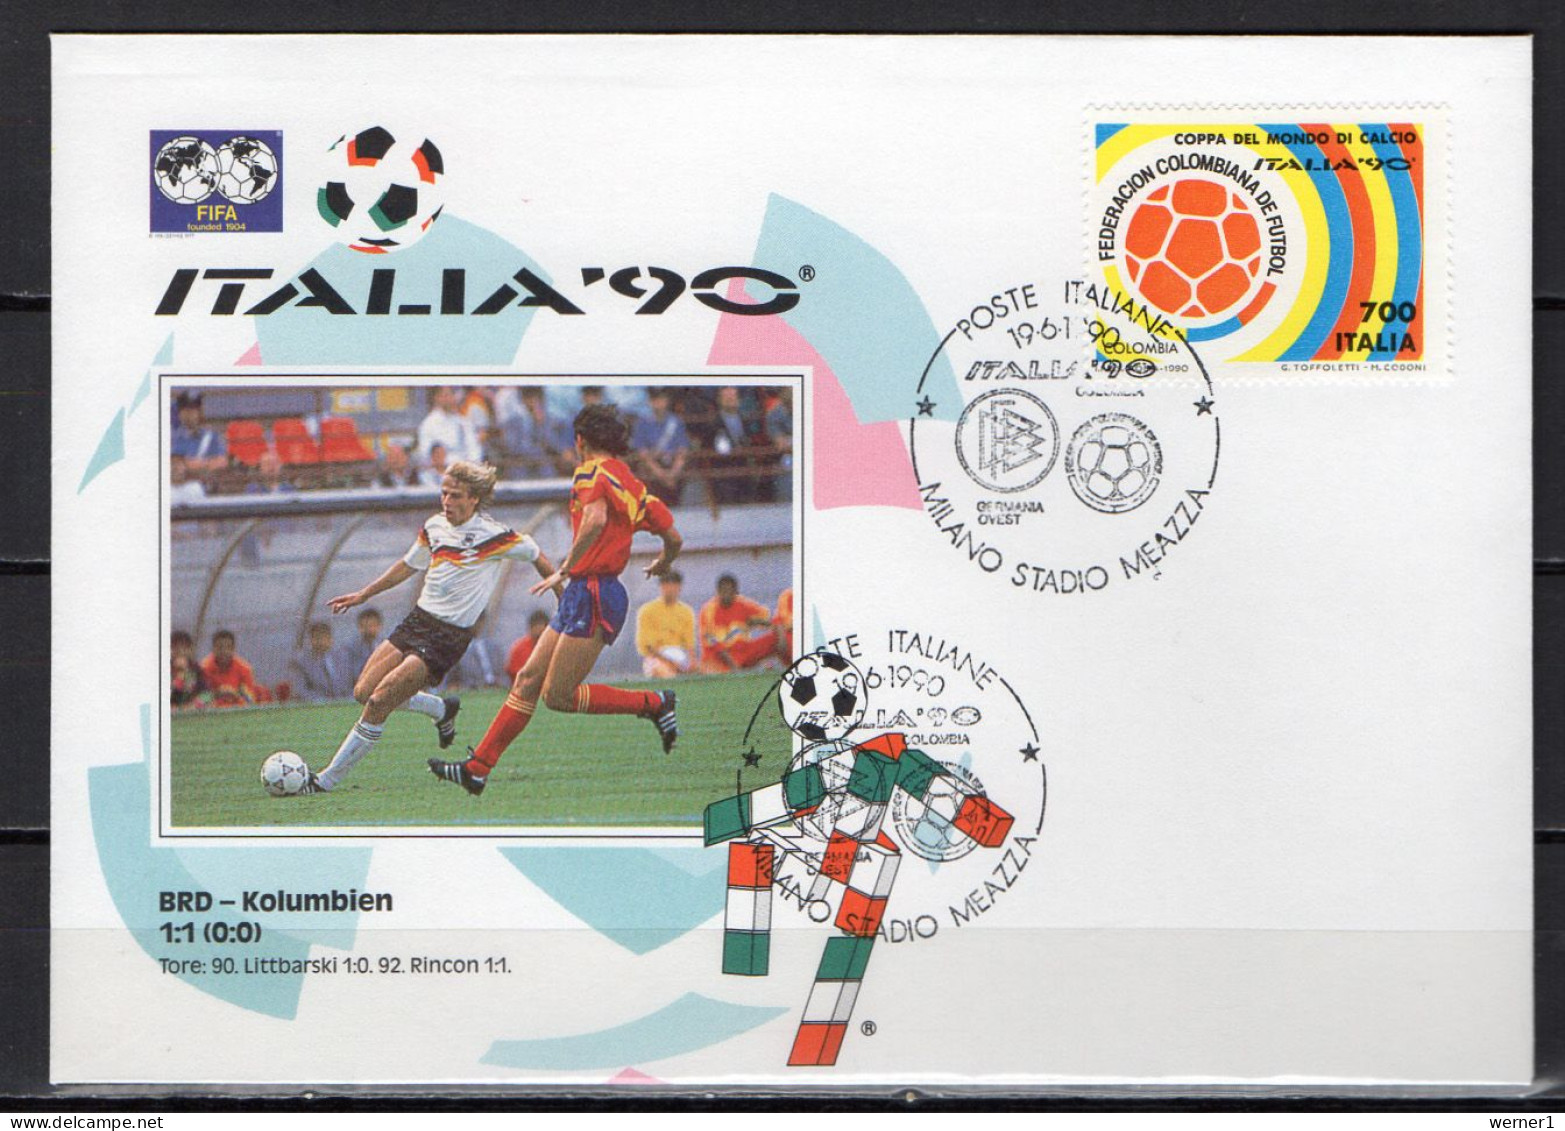 Italy 1990 Football Soccer World Cup Commemorative Cover Final Match Germany - Colombia 1 : 1 - 1990 – Italien